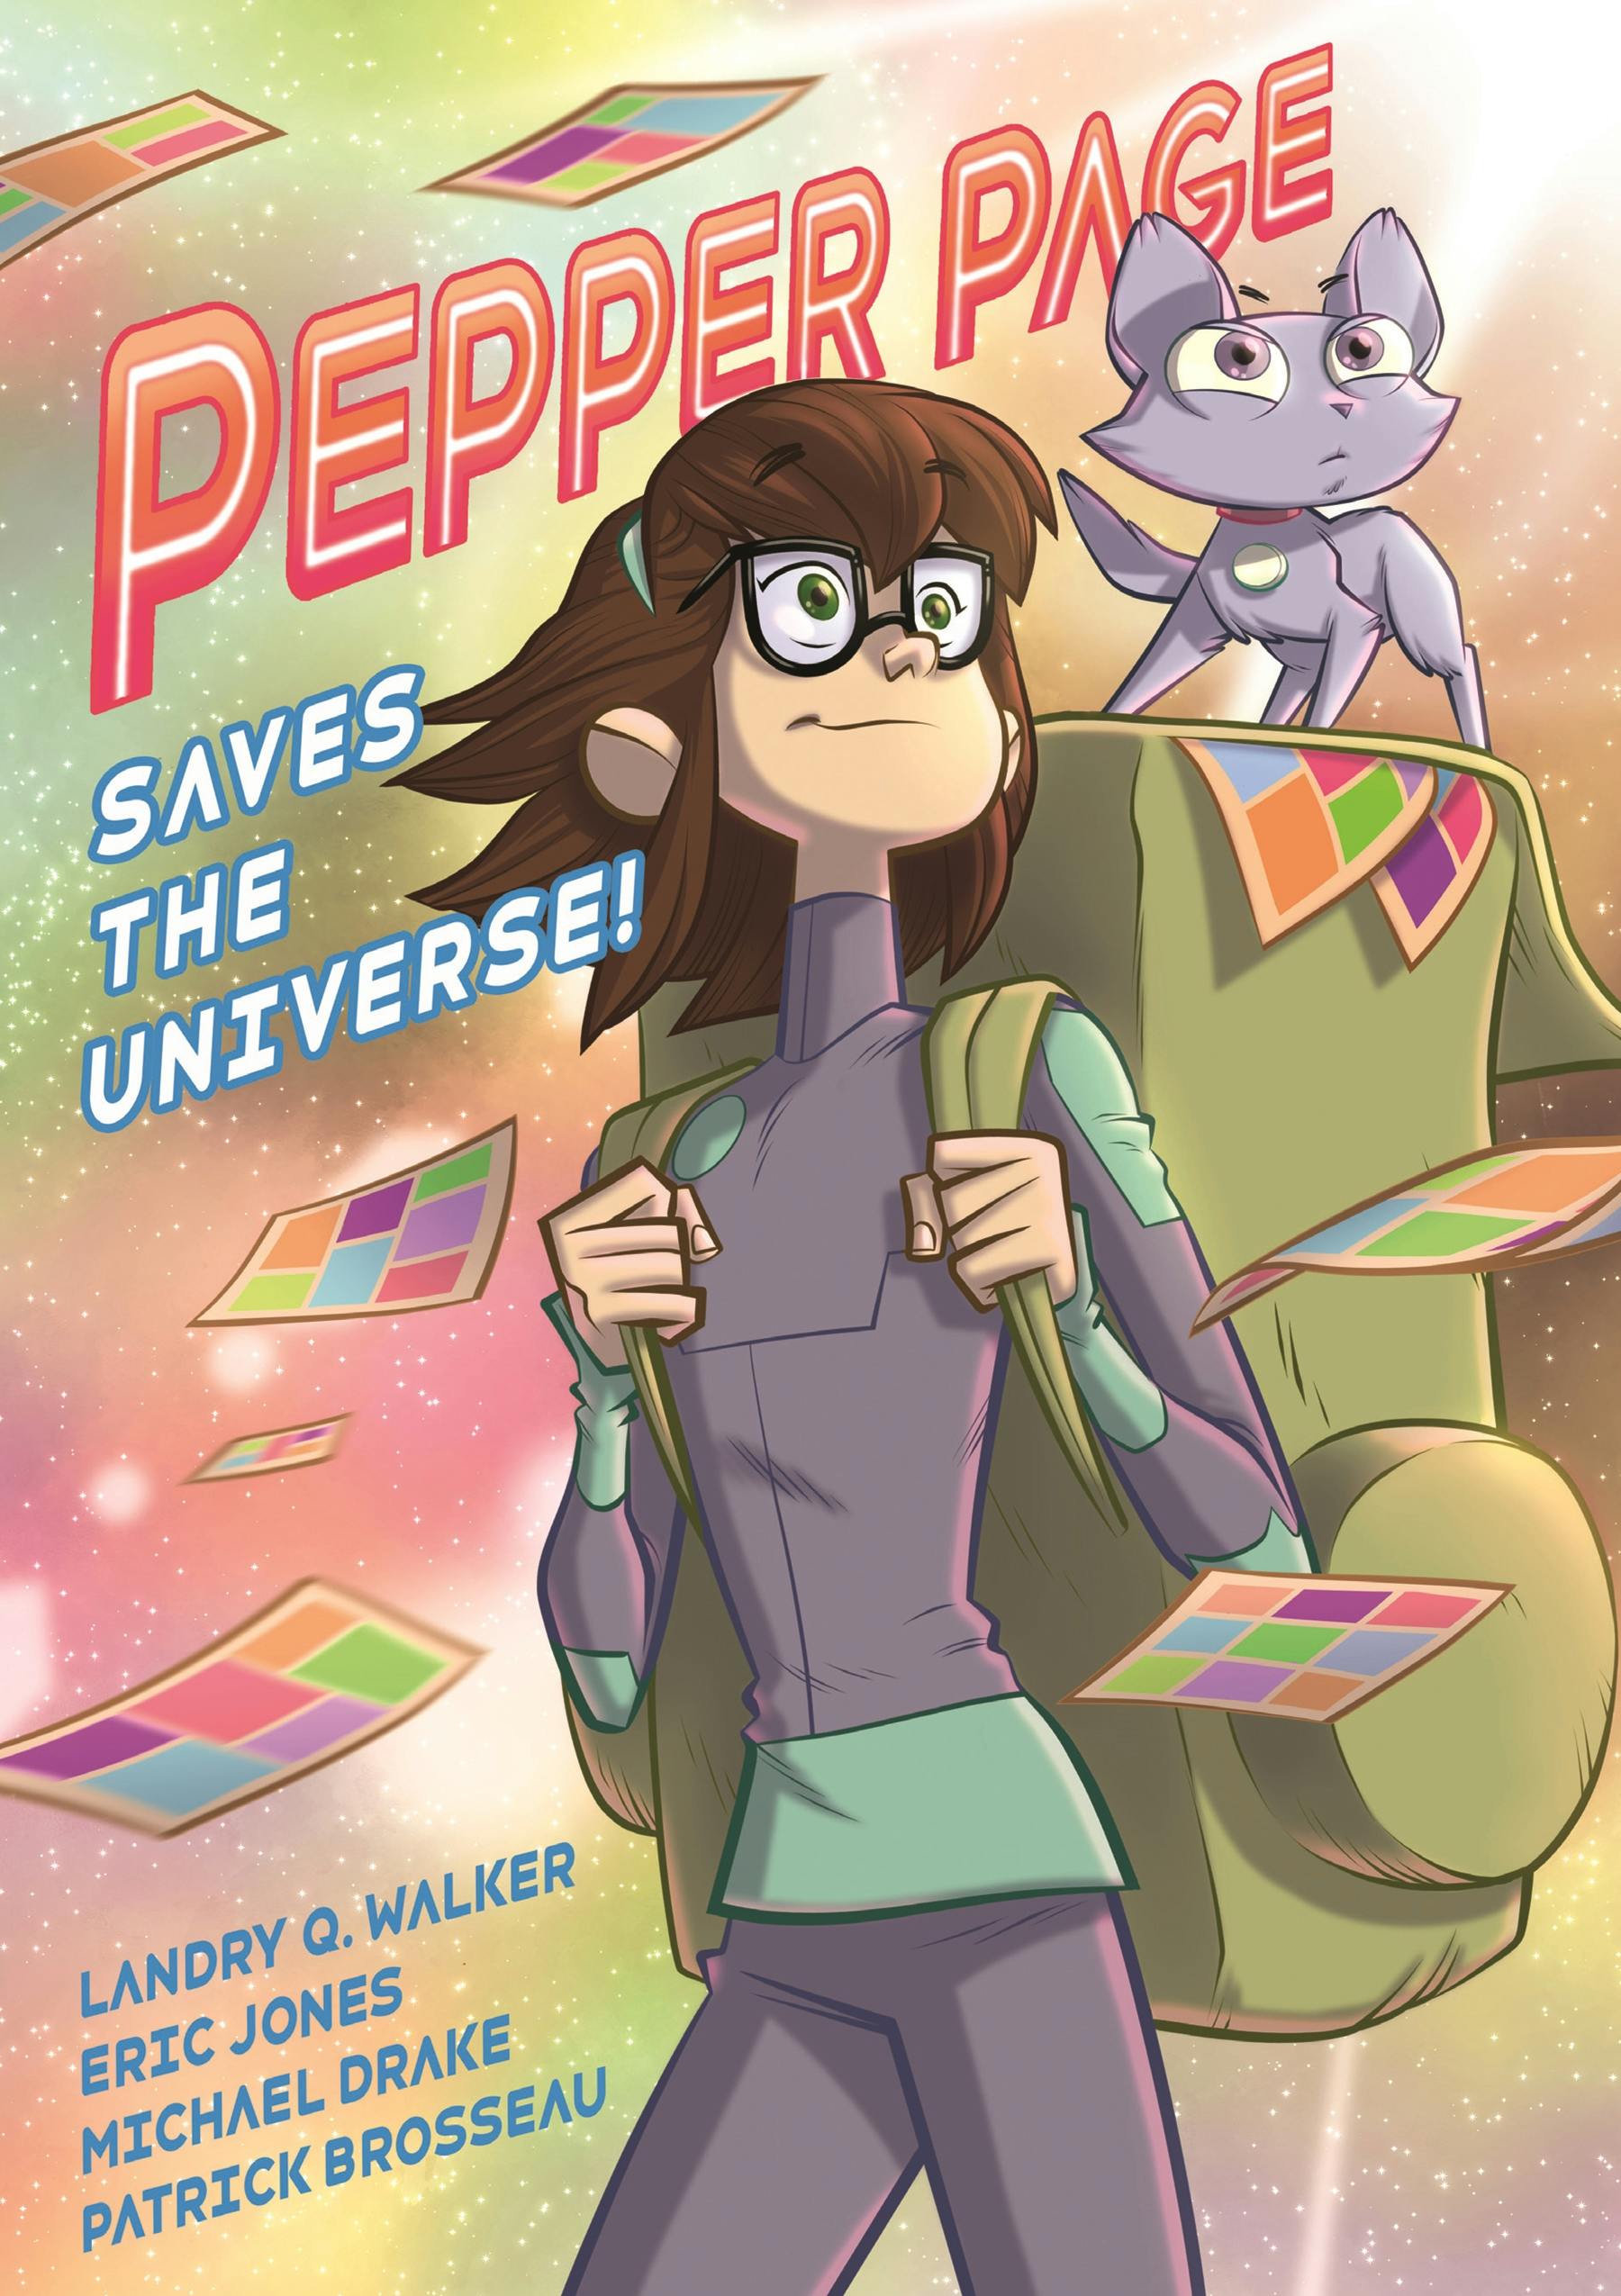 Image of Pepper Page Saves the Universe!